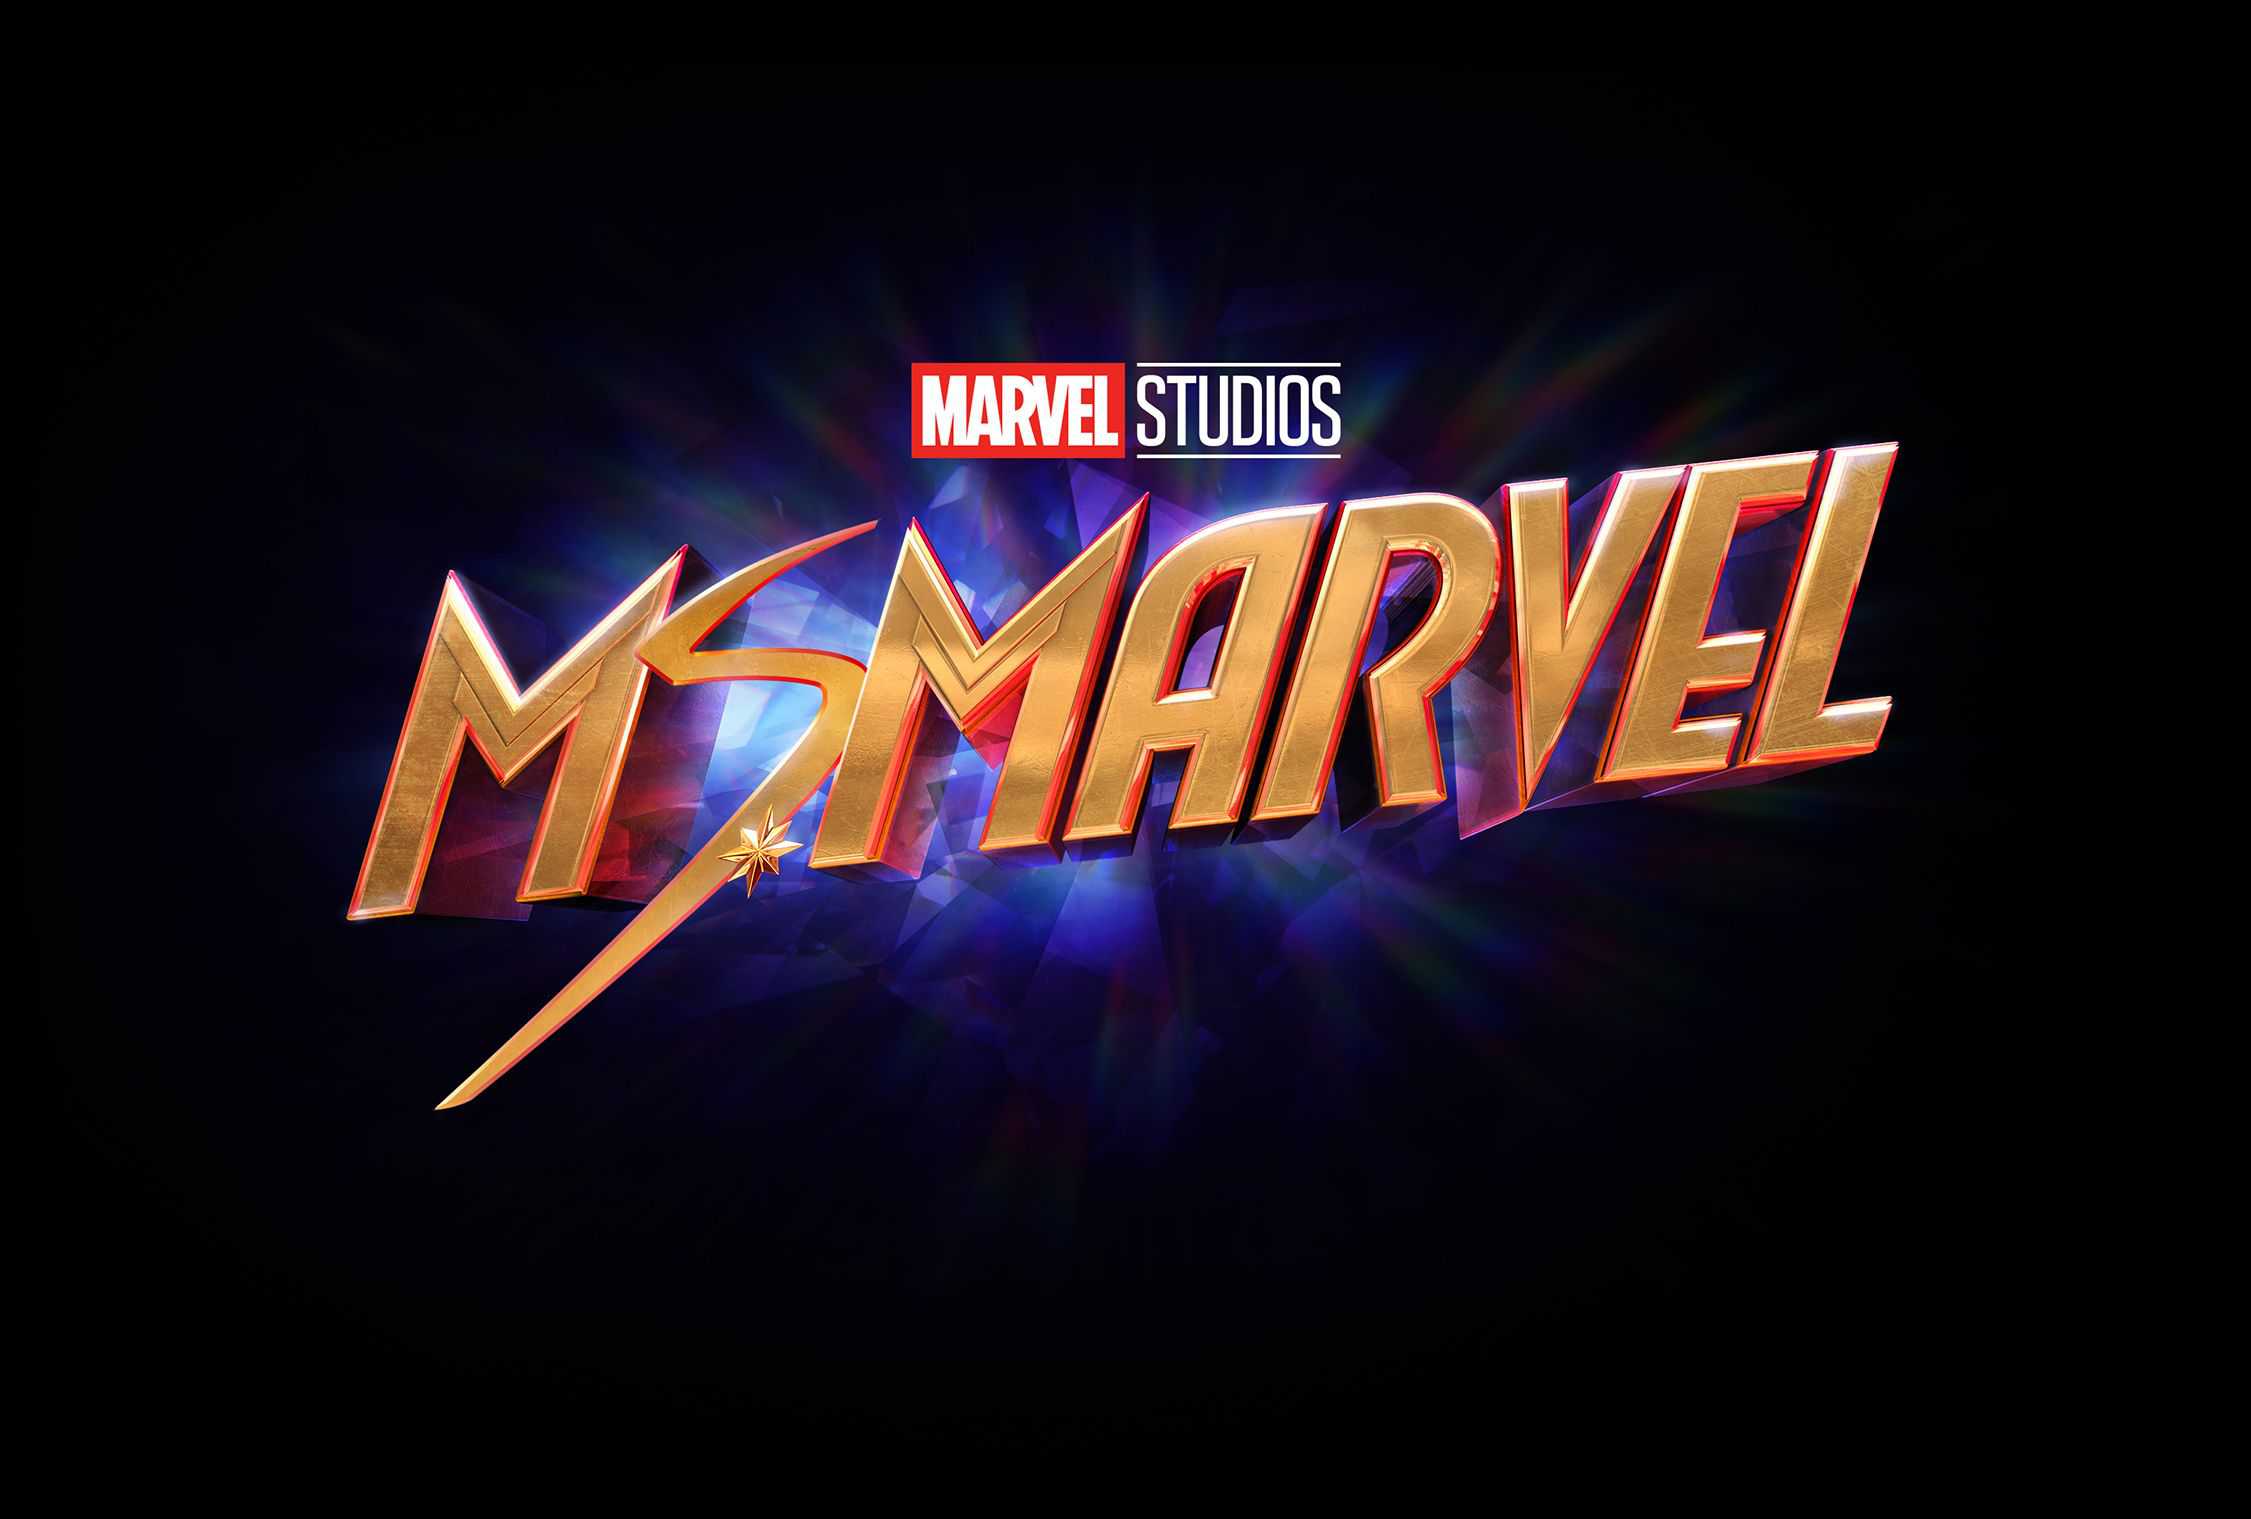 Ms Marvel Series Coming to Disney+ in 2021